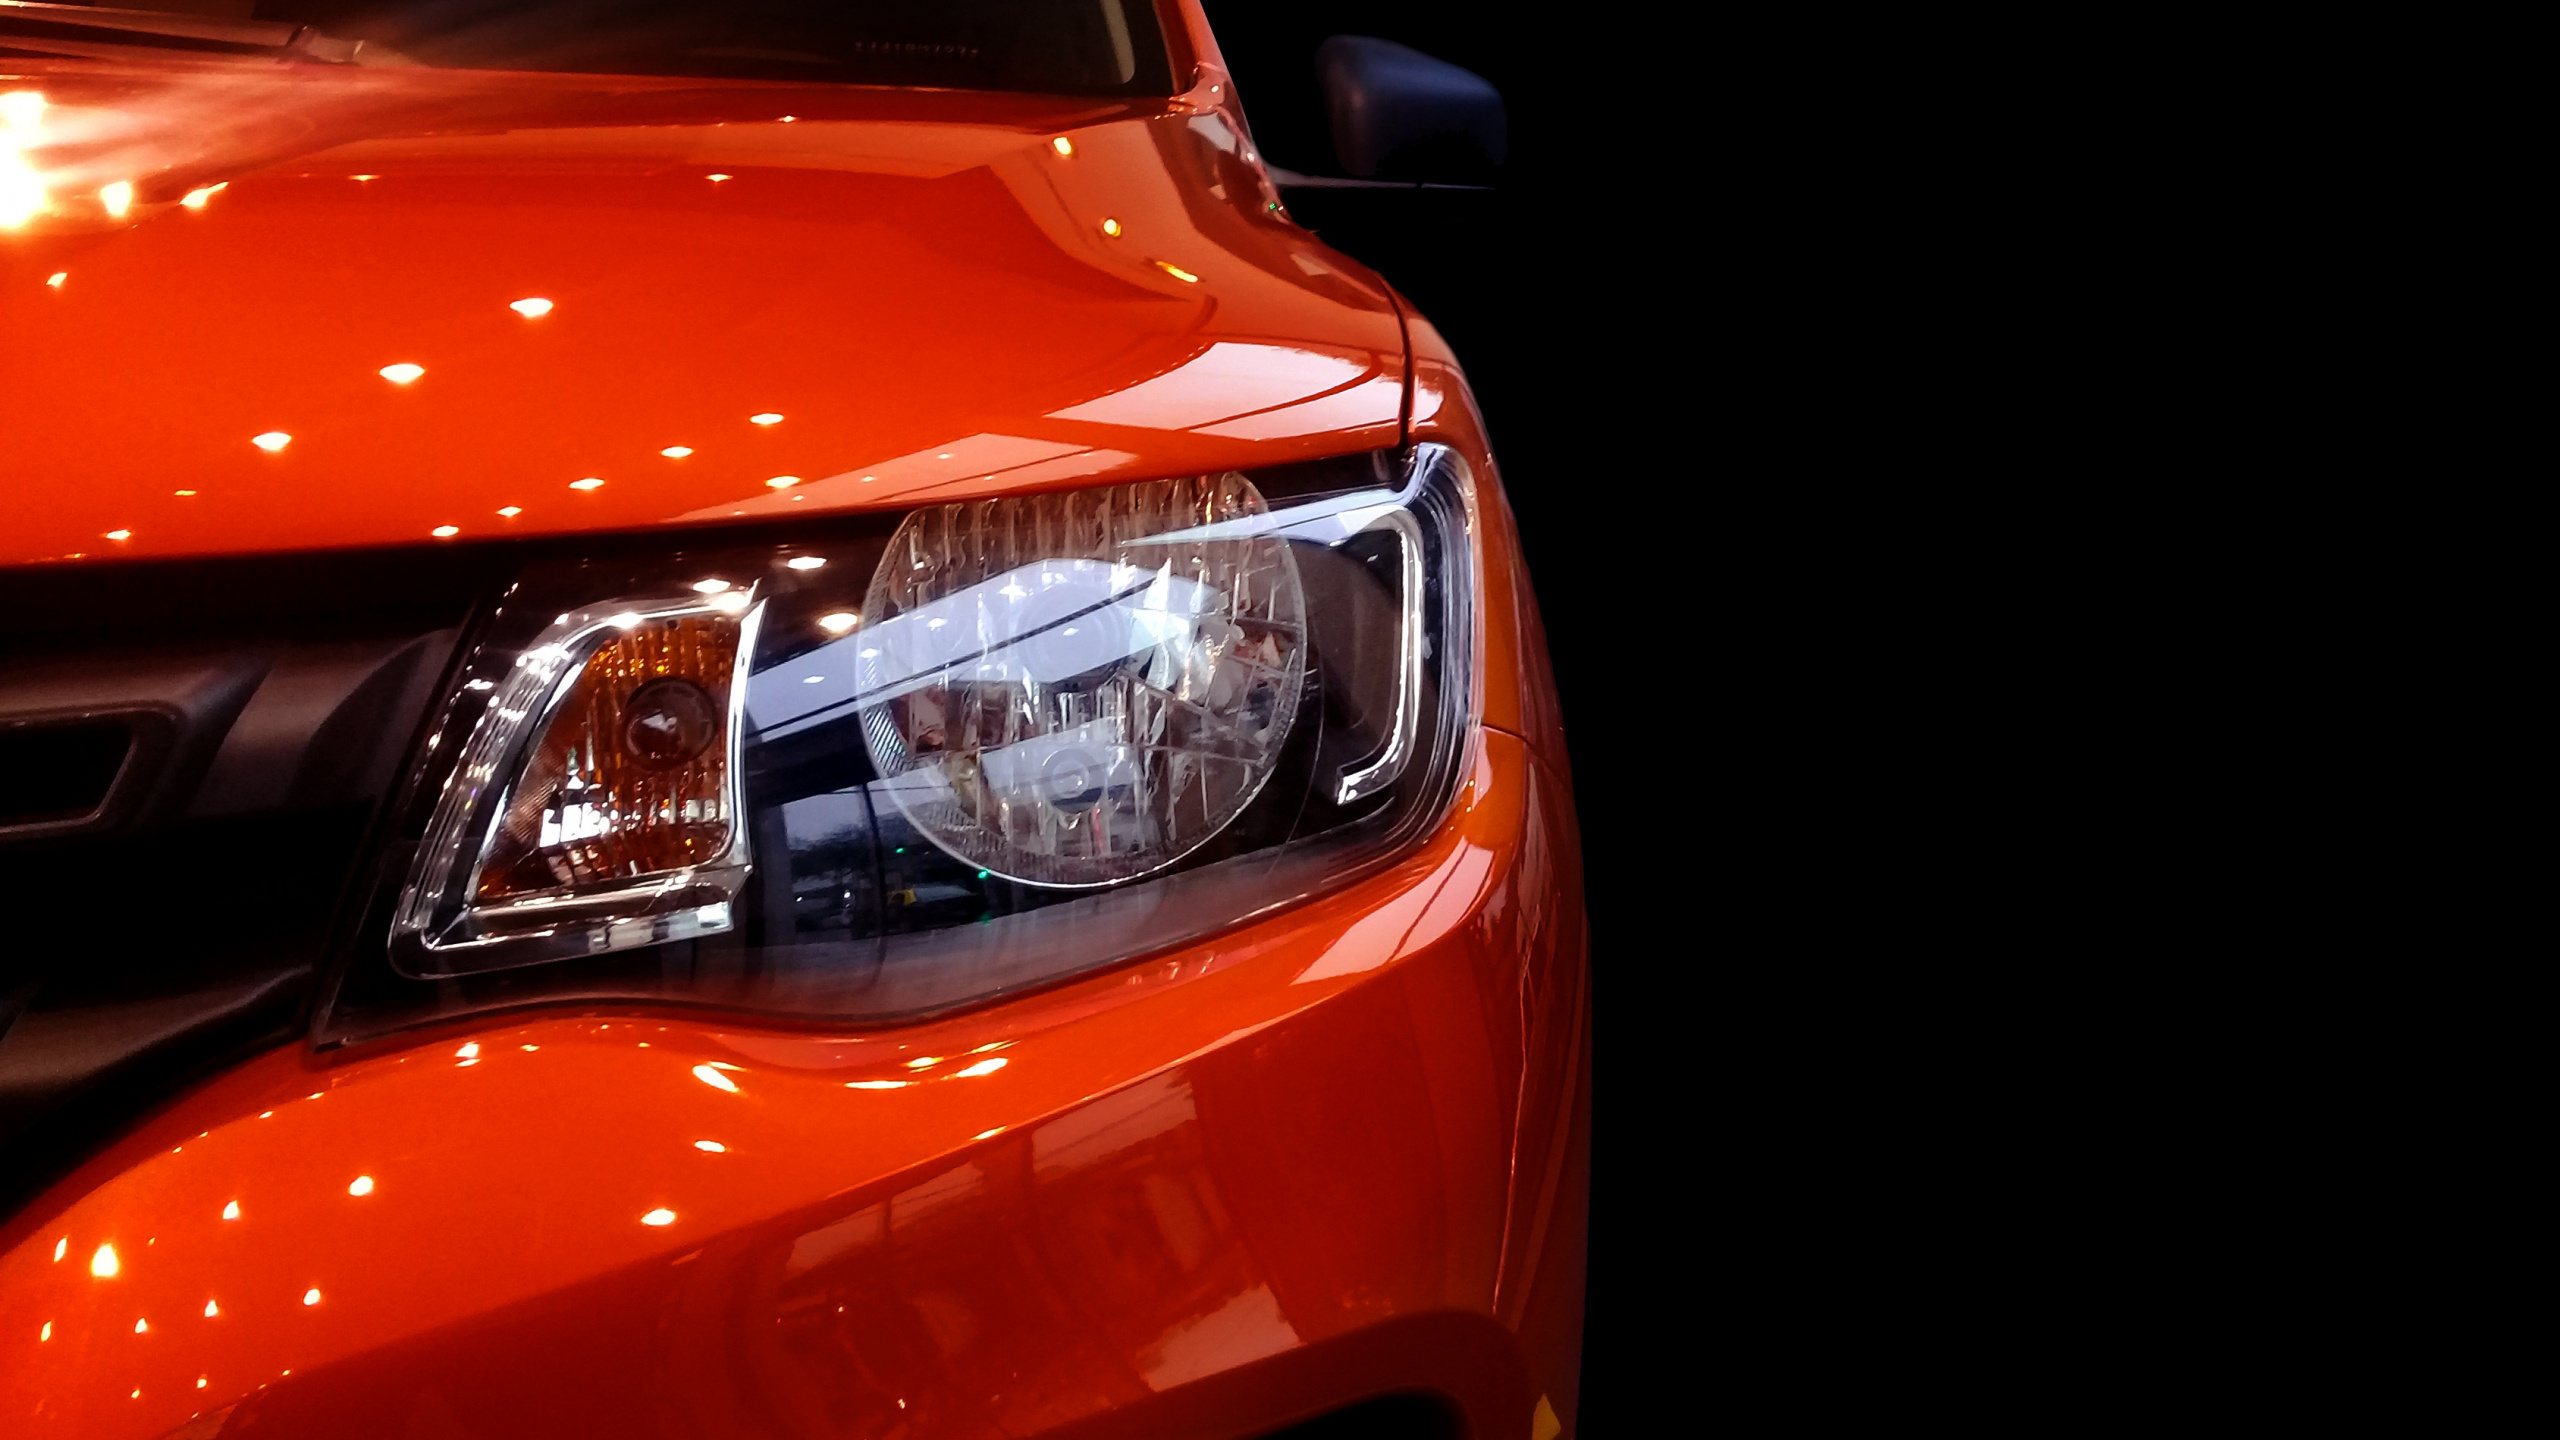 Orange Car With White Lights. Wallpaper in 2560x1440 Resolution